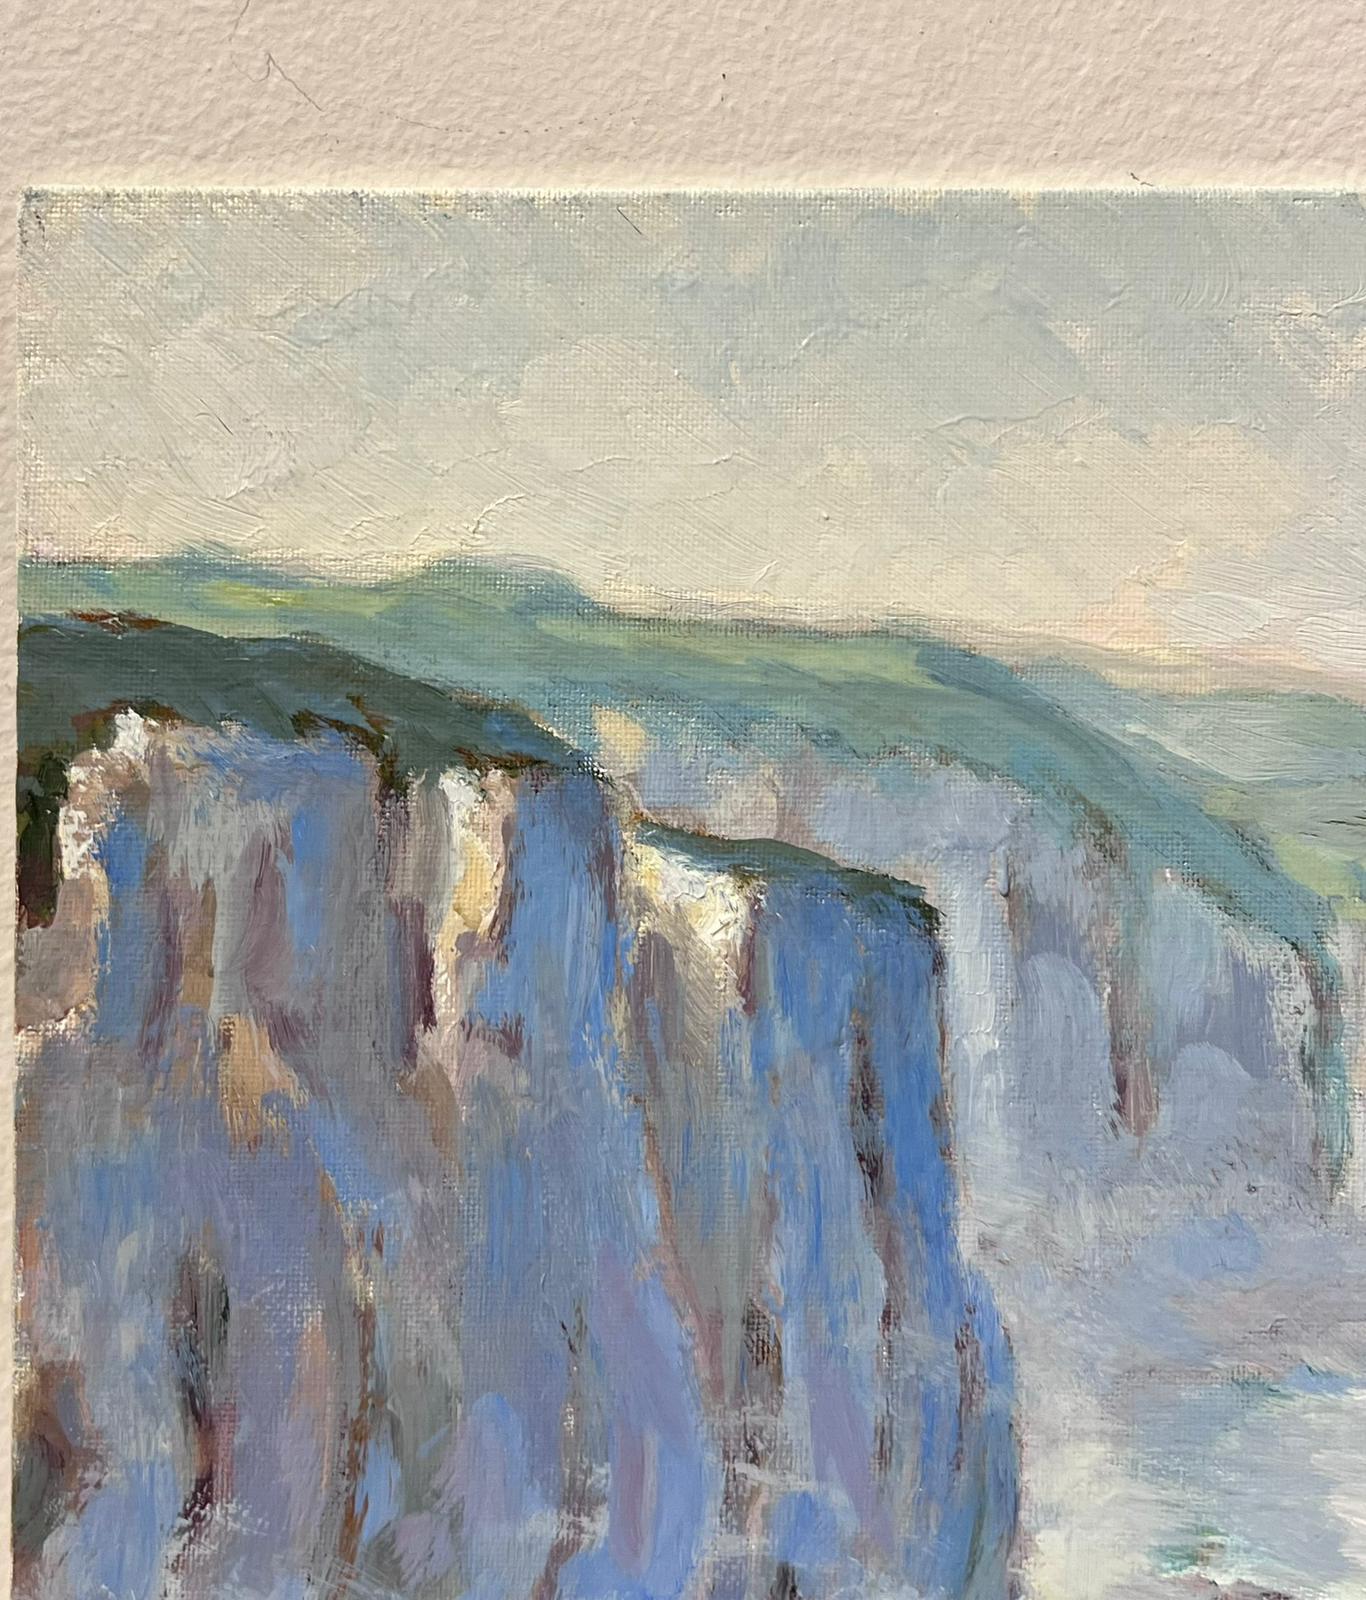 Normandy Cliffs
by Georges Bordonave (French contemporary) 
oil painting on board, unframed
dated 1989
board: 10.75 x 13.75 inches
condition: very good
provenance: from a large private collection of this artists work, western Paris, France. 